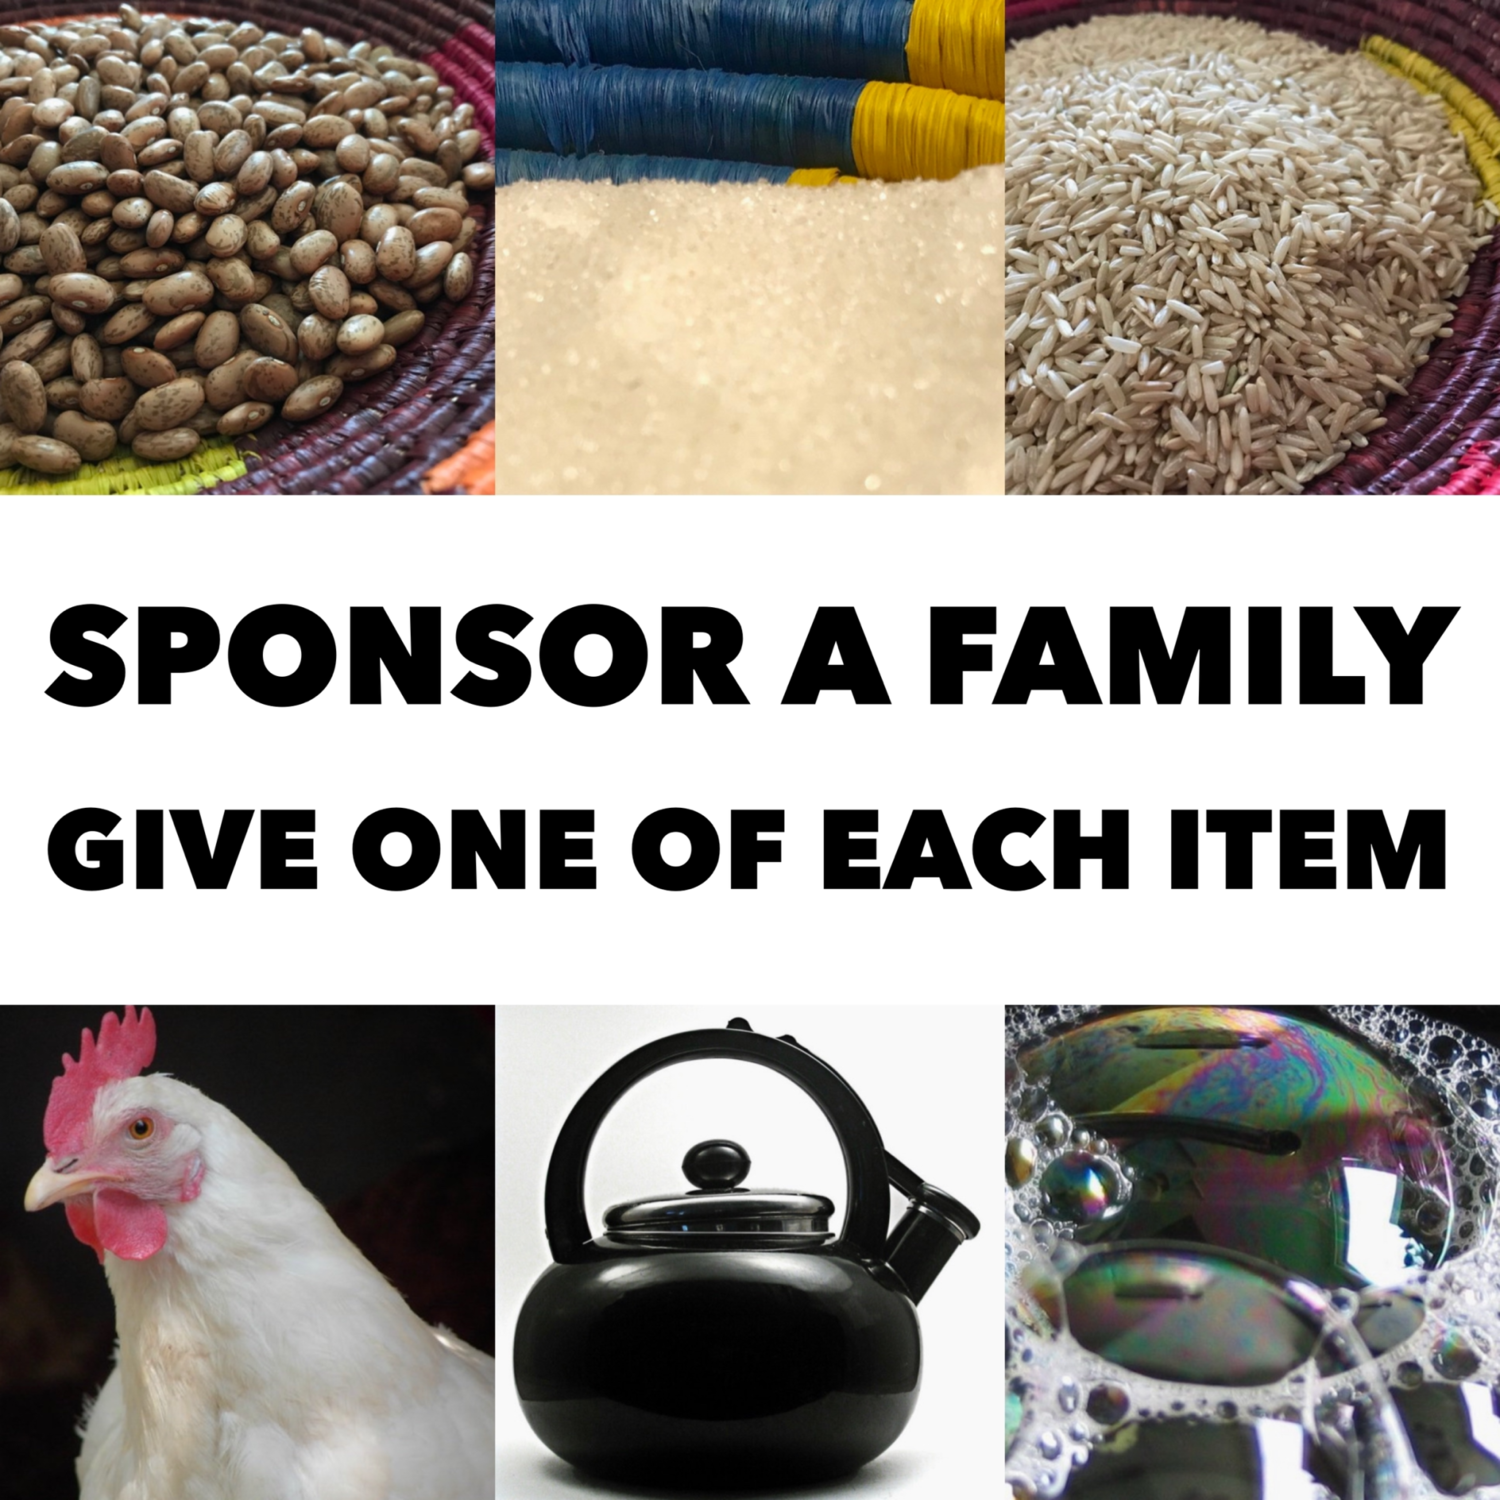 Donate for an artisan family’s entire Christmas: rice, beans, sugar, soap, a chicken, and an extra surprise